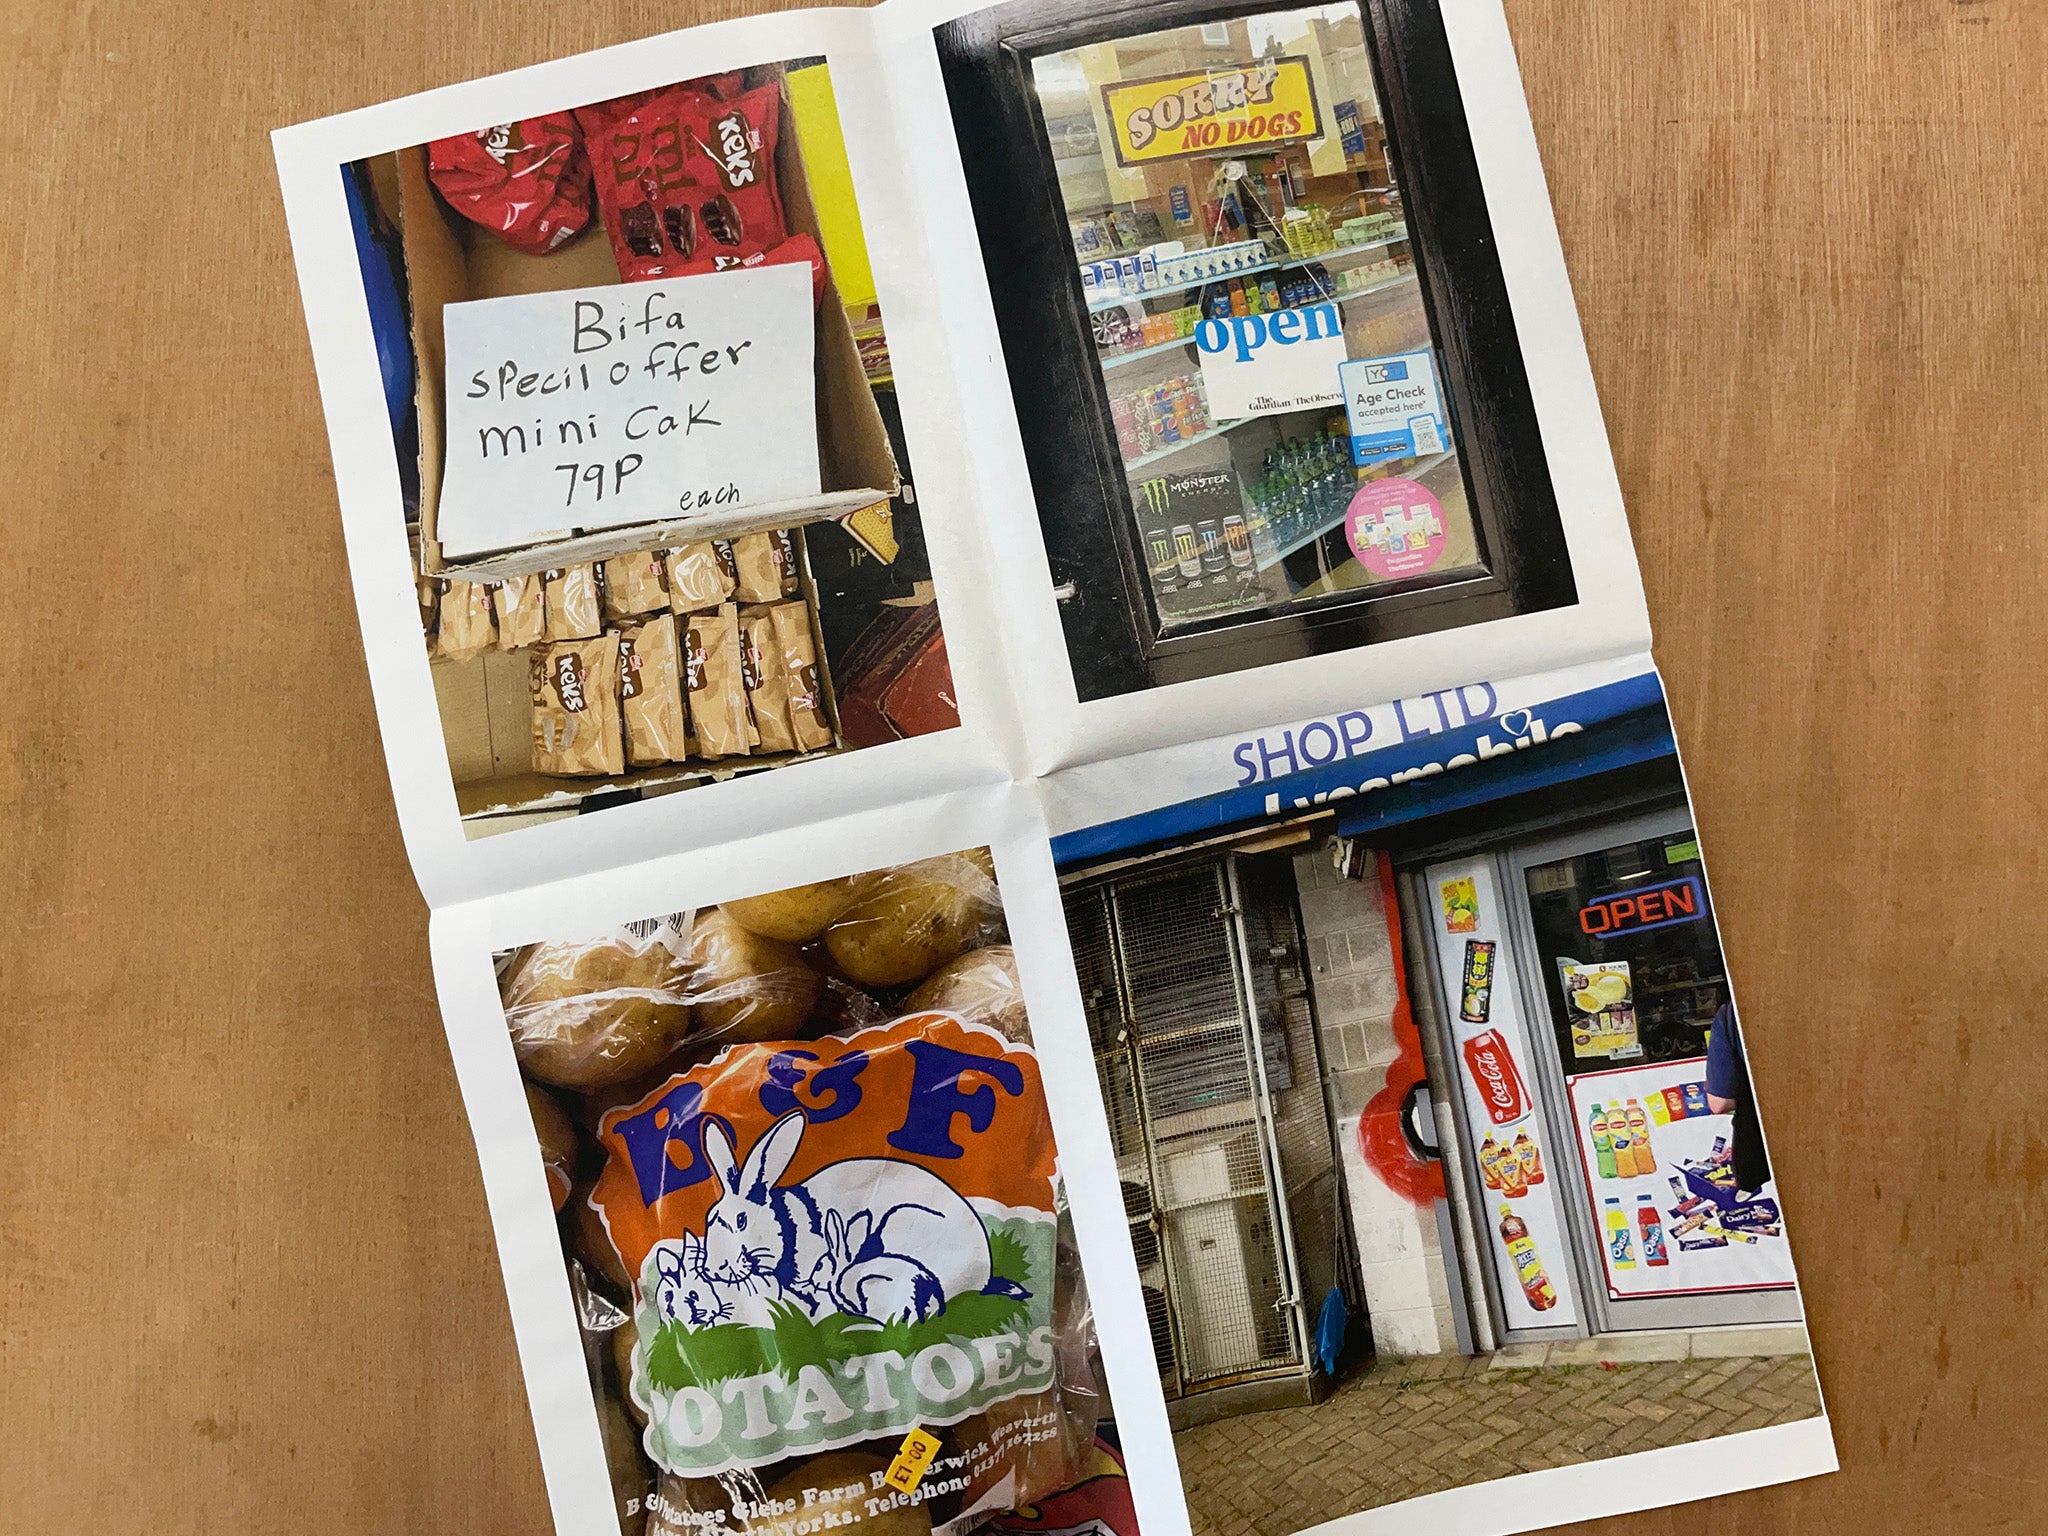 CORNER SHOP ZINE PACK by Soft and Prickly